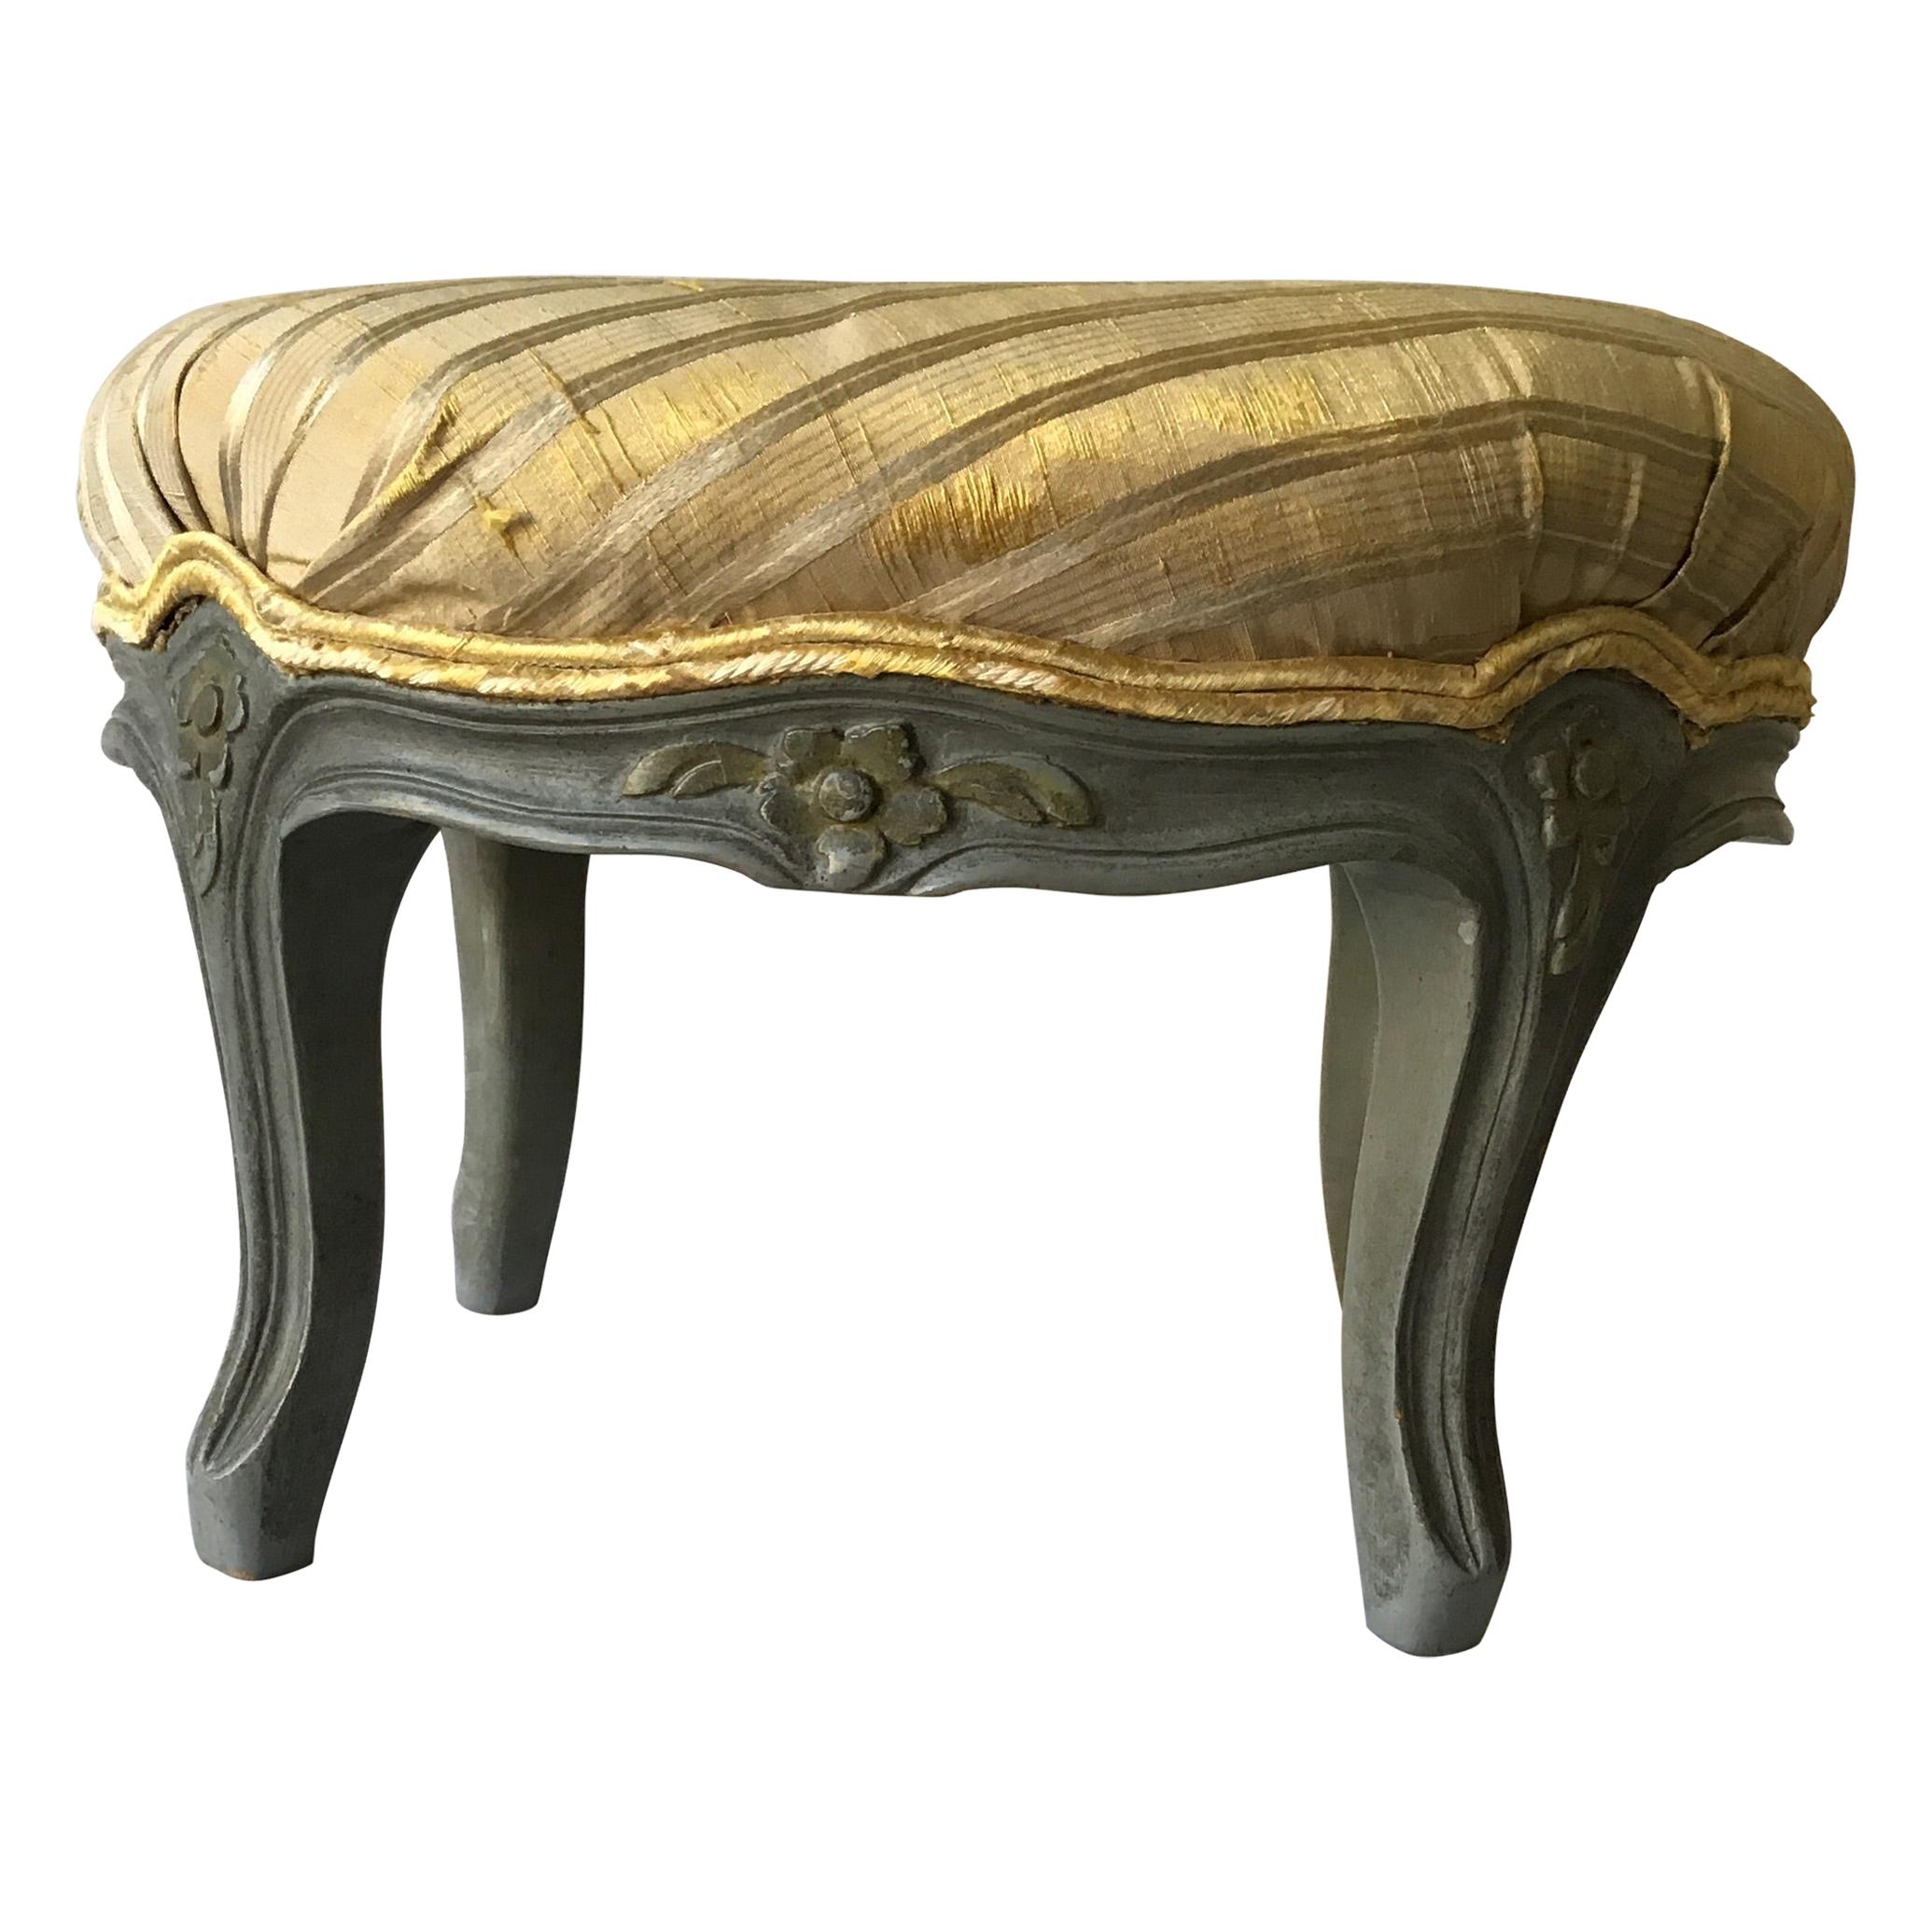 1910 French Carved Wood Painted Footstool